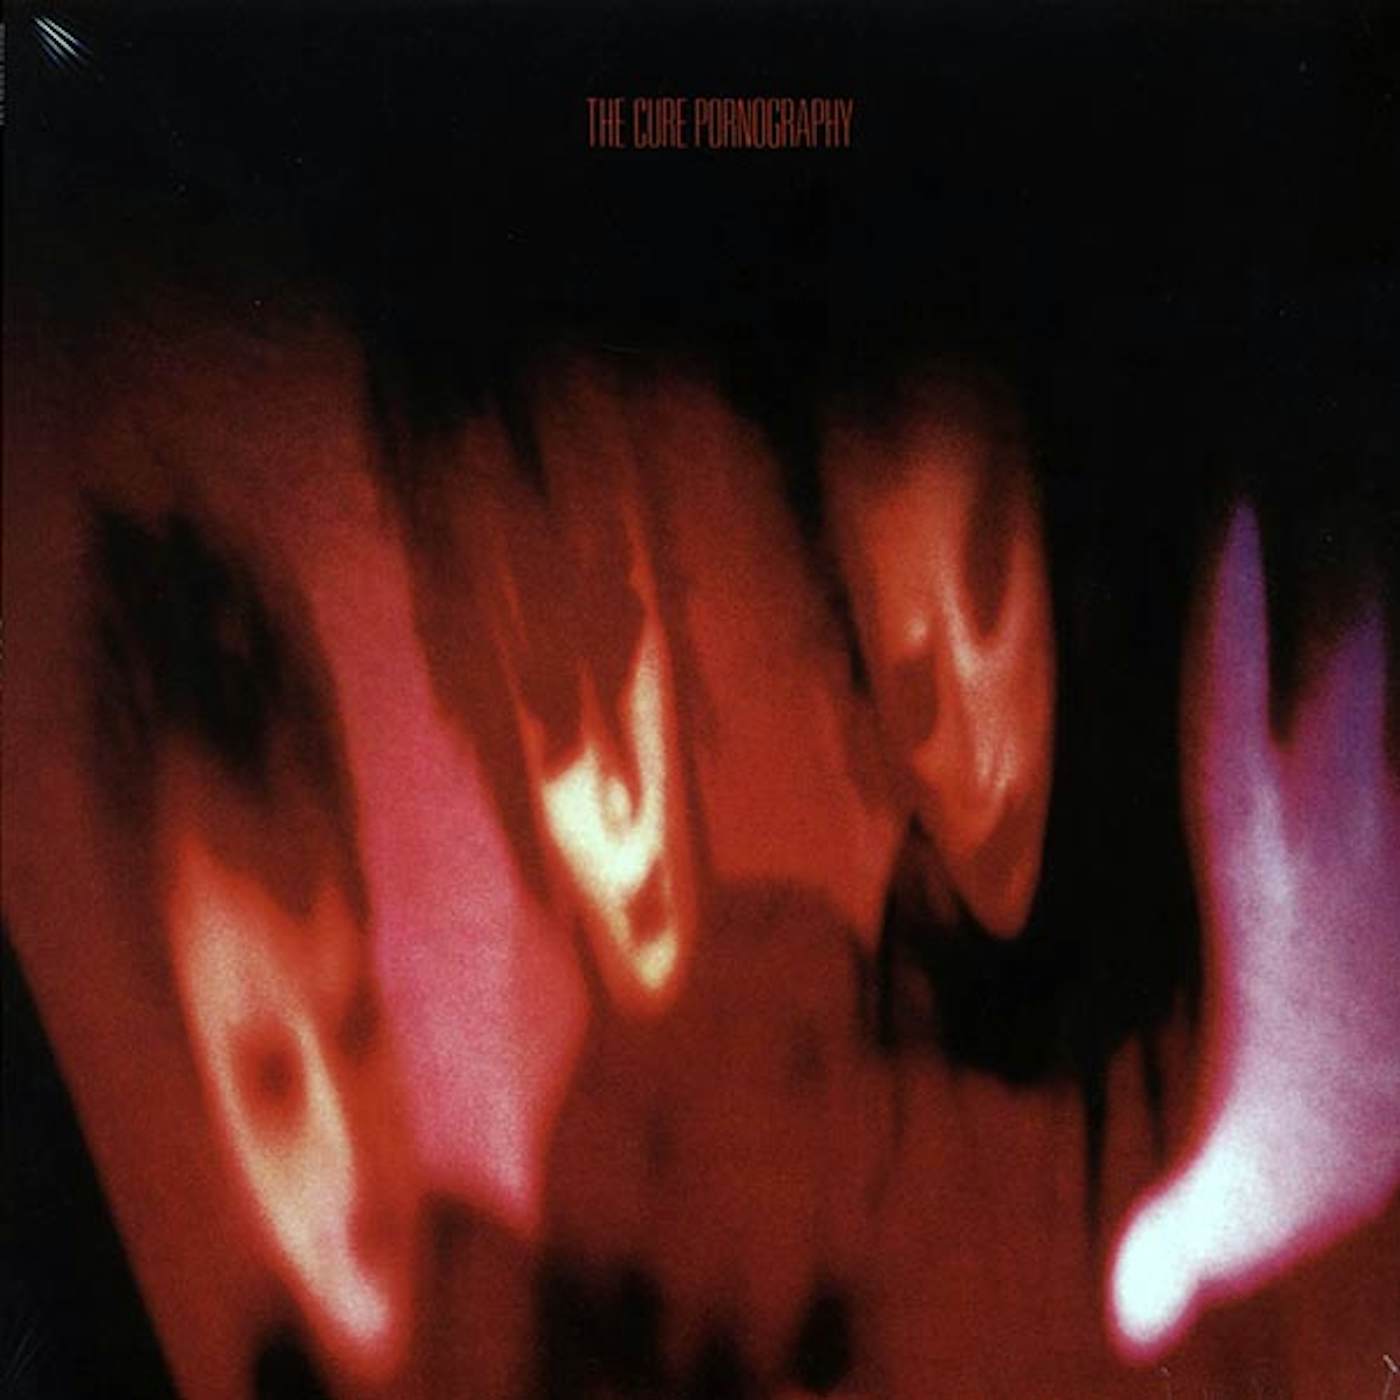 The Cure  LP -  Pornography (incl. mp3) (180g) (remastered) (Vinyl)